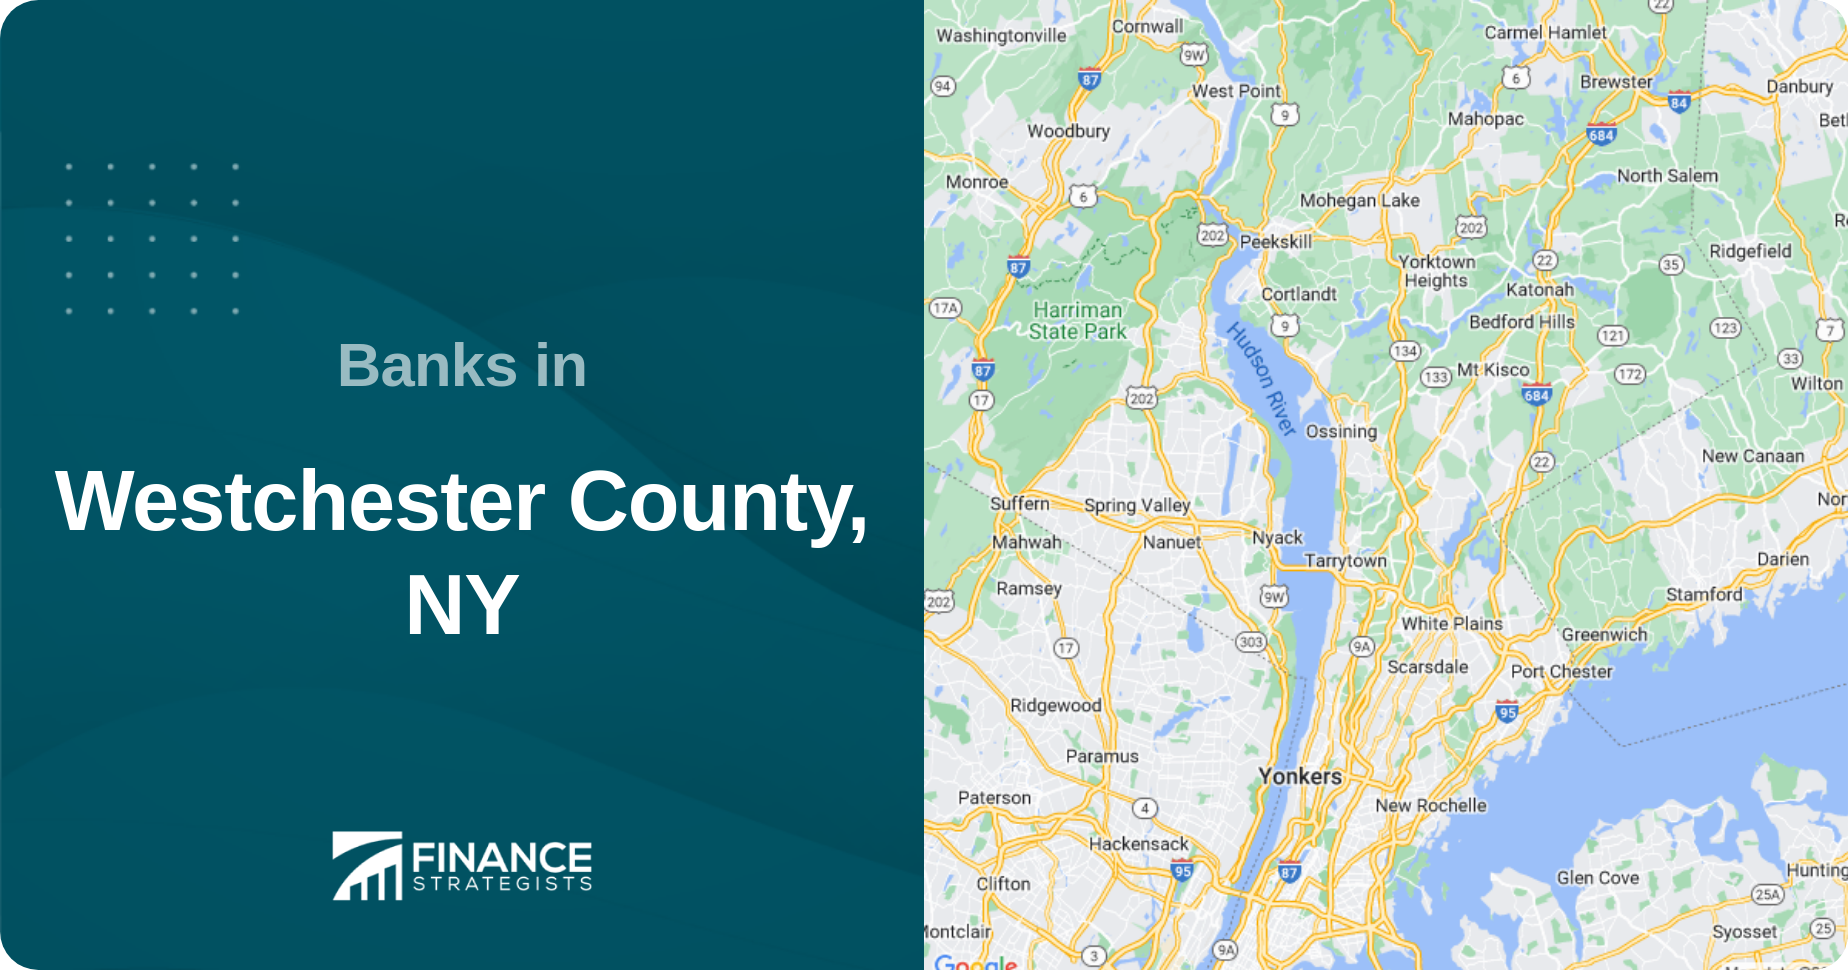 Banks in Westchester County, NY